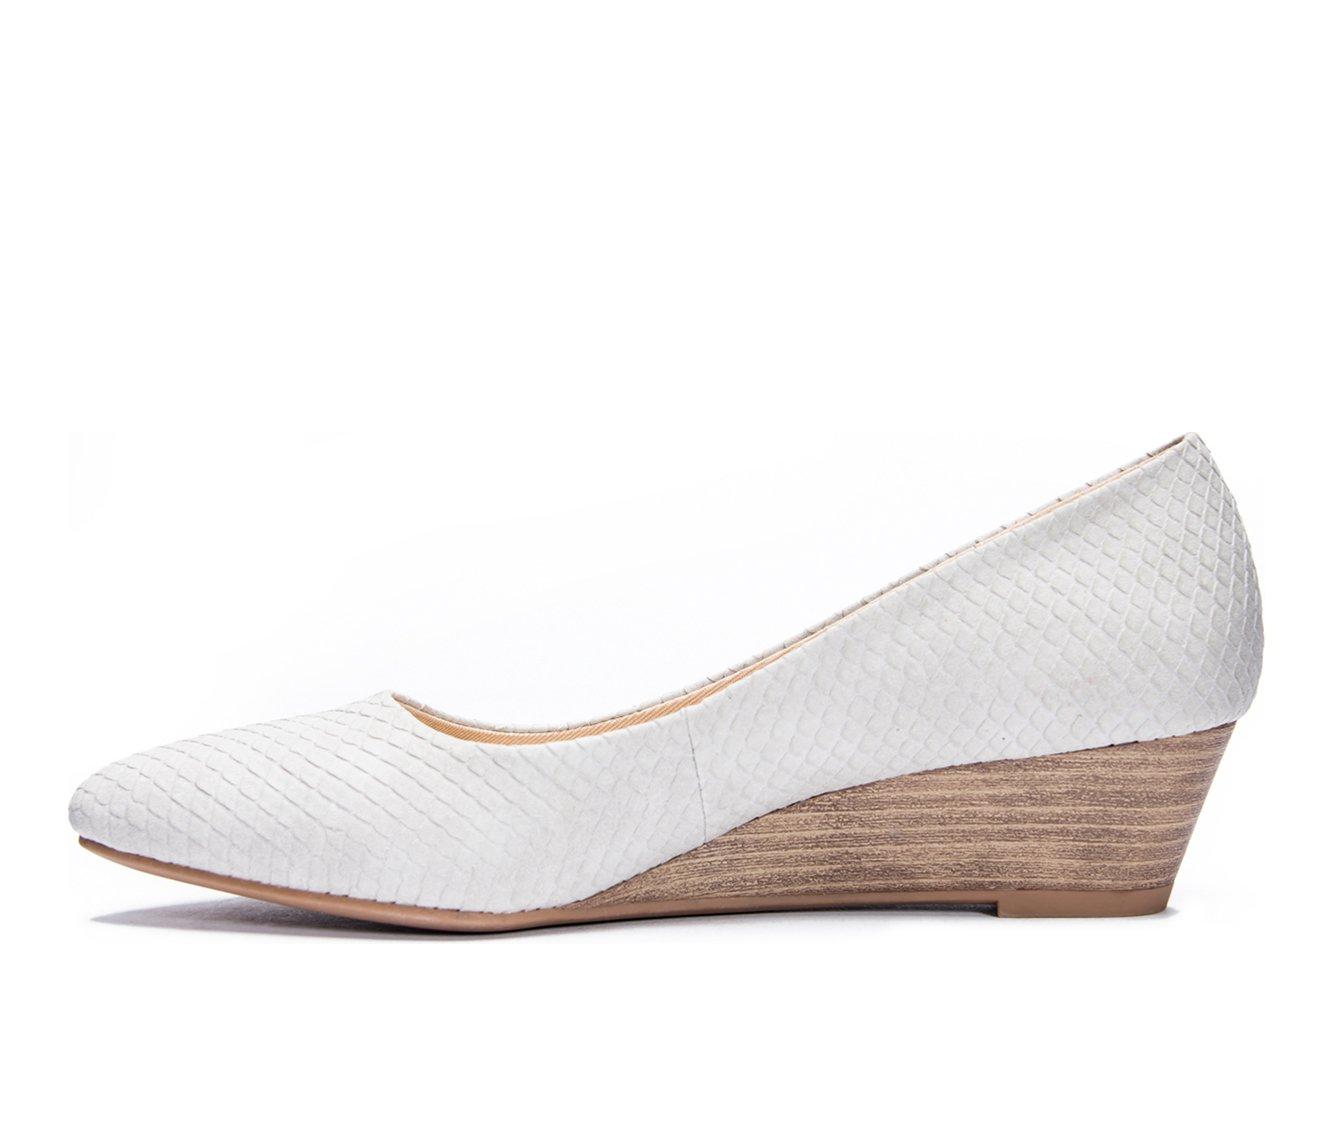 Women's CL By Laundry Alyce Wedges